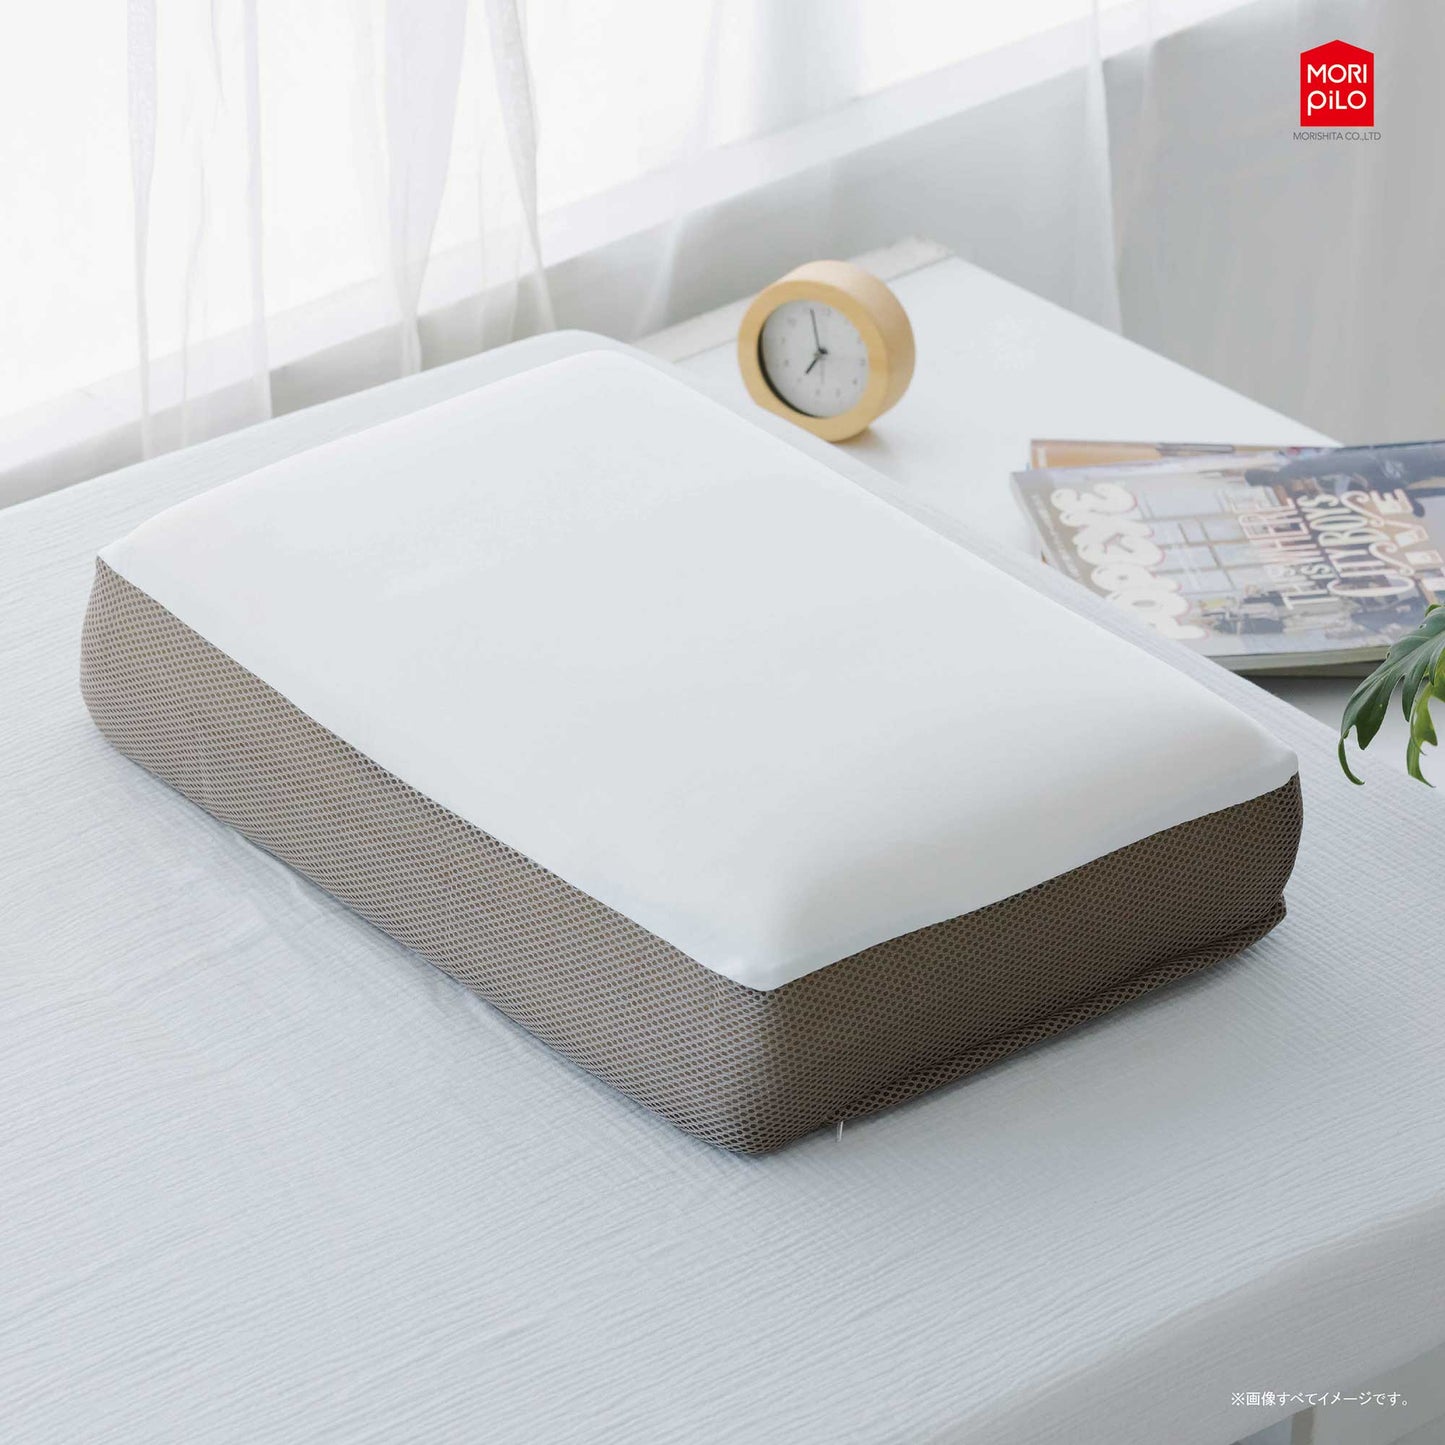 8-level adjustable pillow with high resilience so you don't have to worry about height